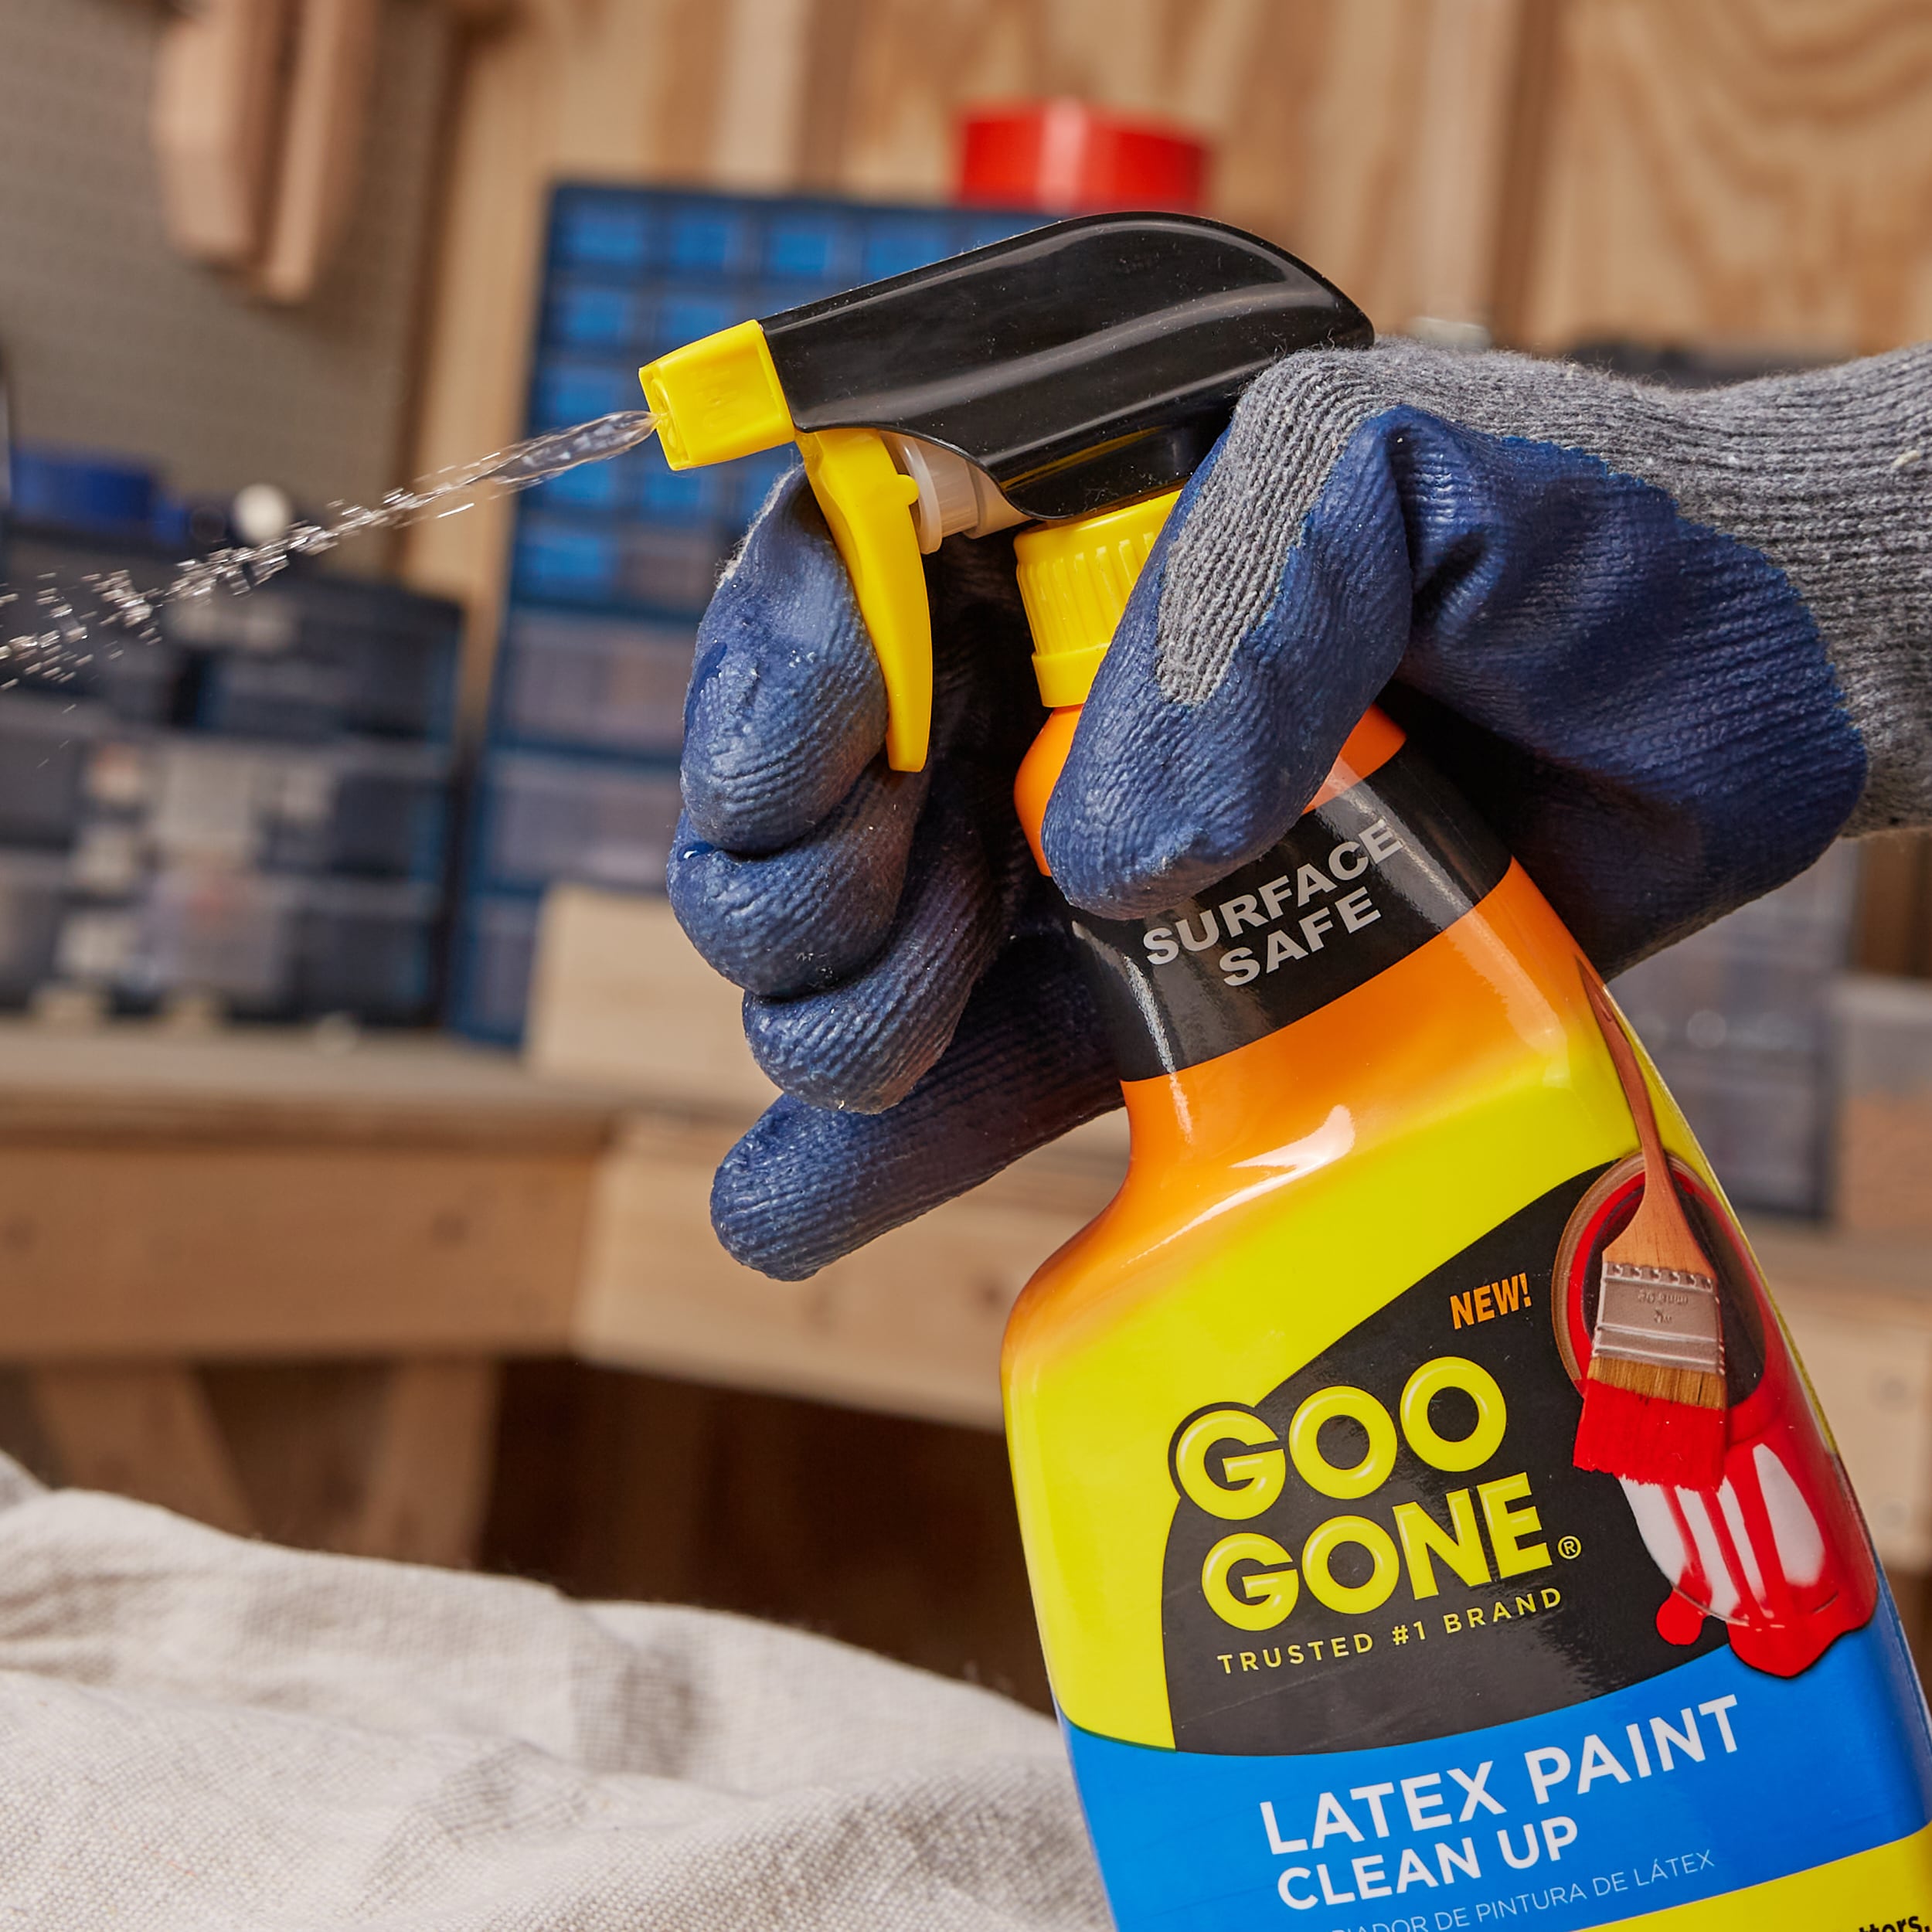 How to Clean Up and Remove Latex Paint